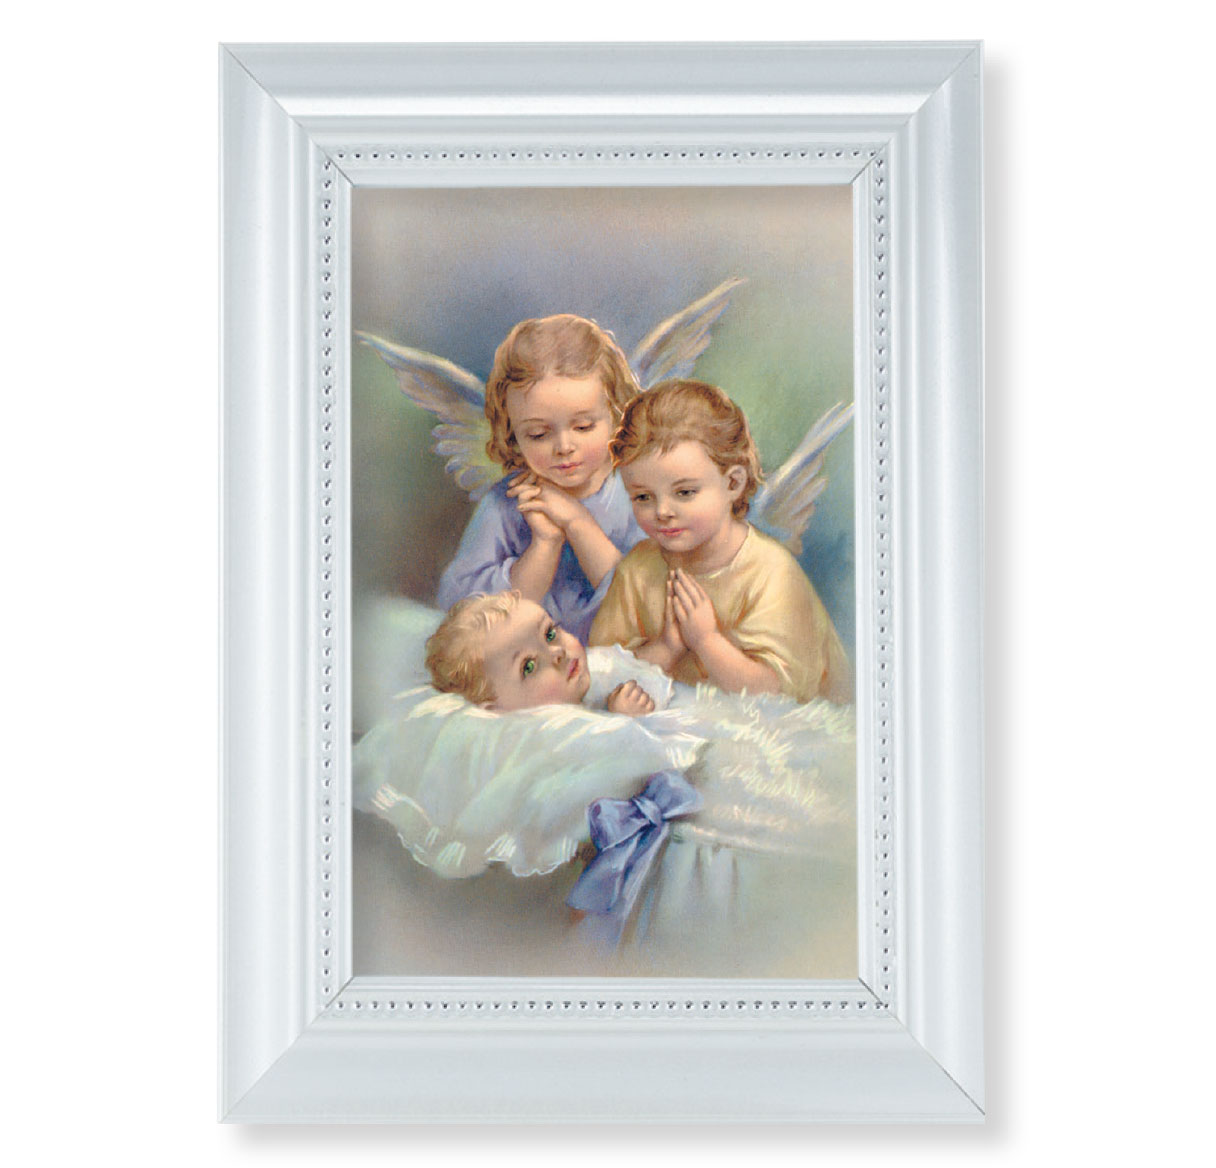 Print Guardian Angels 4 x 6 inch Pearlized White Framed